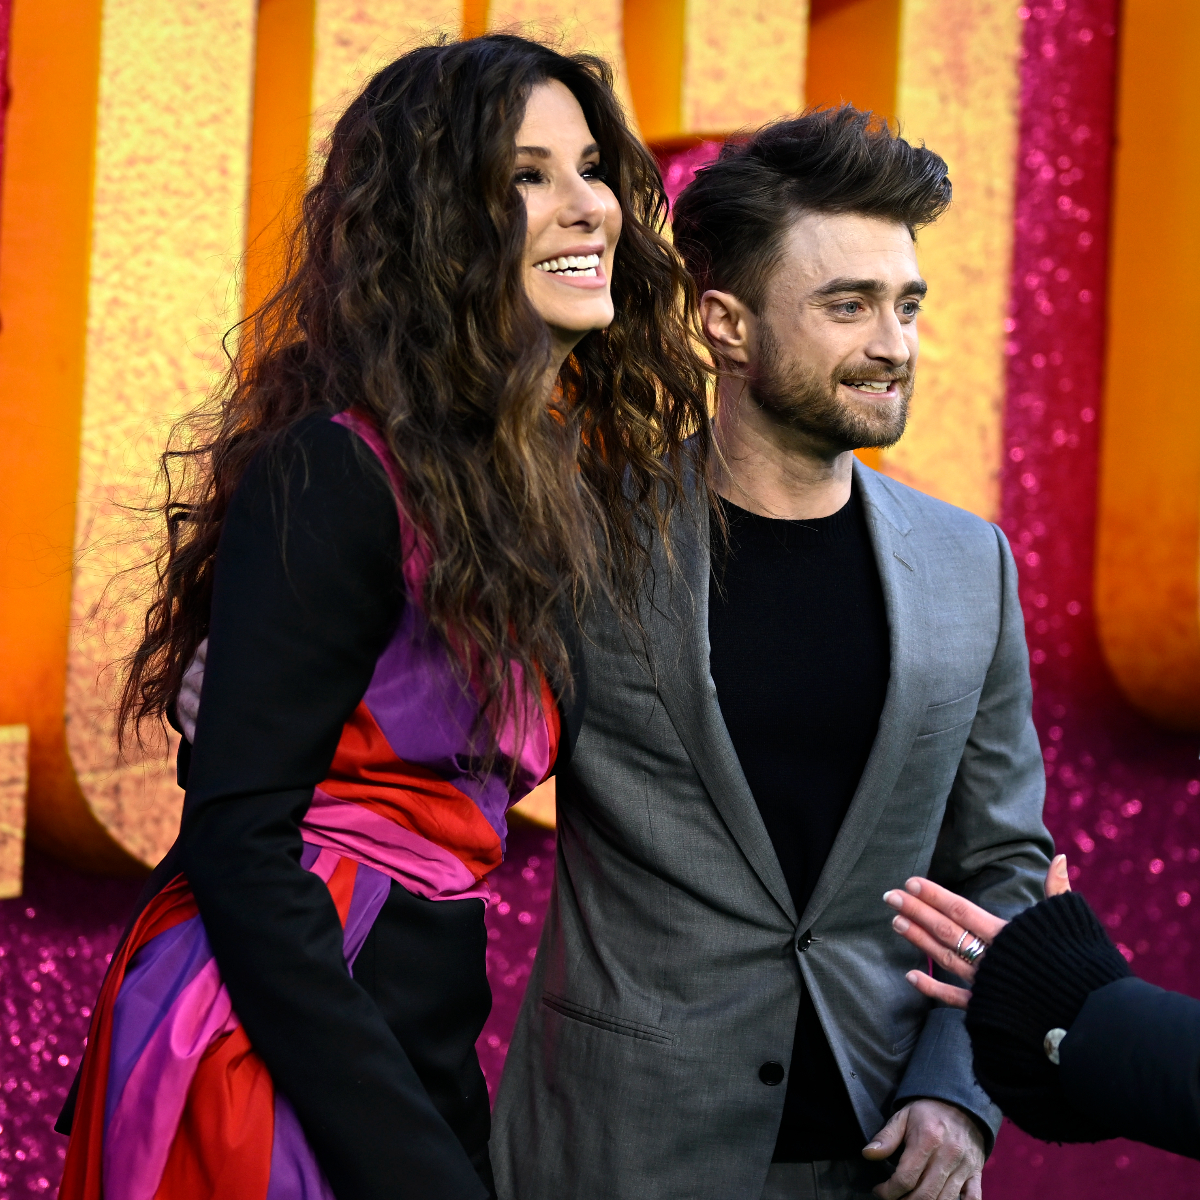 Daniel Radcliffe opens up